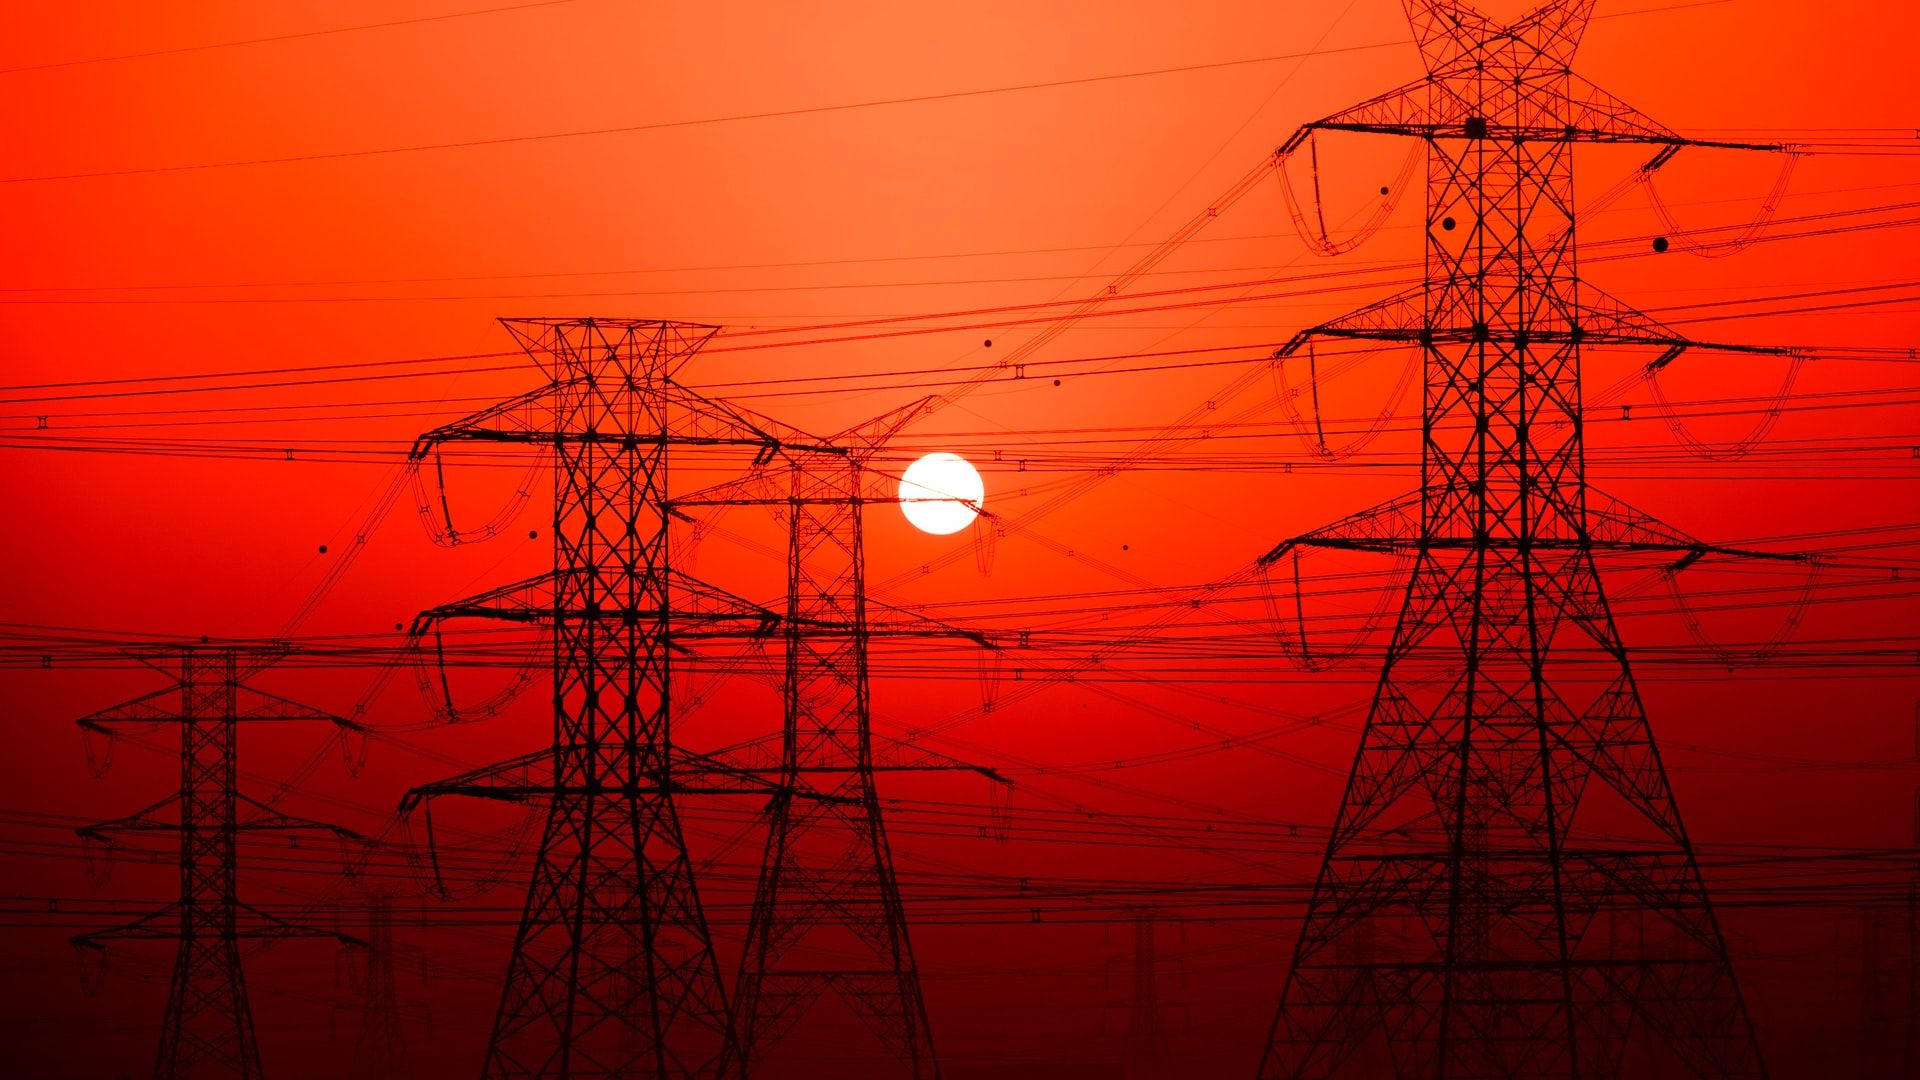 Image of transmission lines and a red sunset